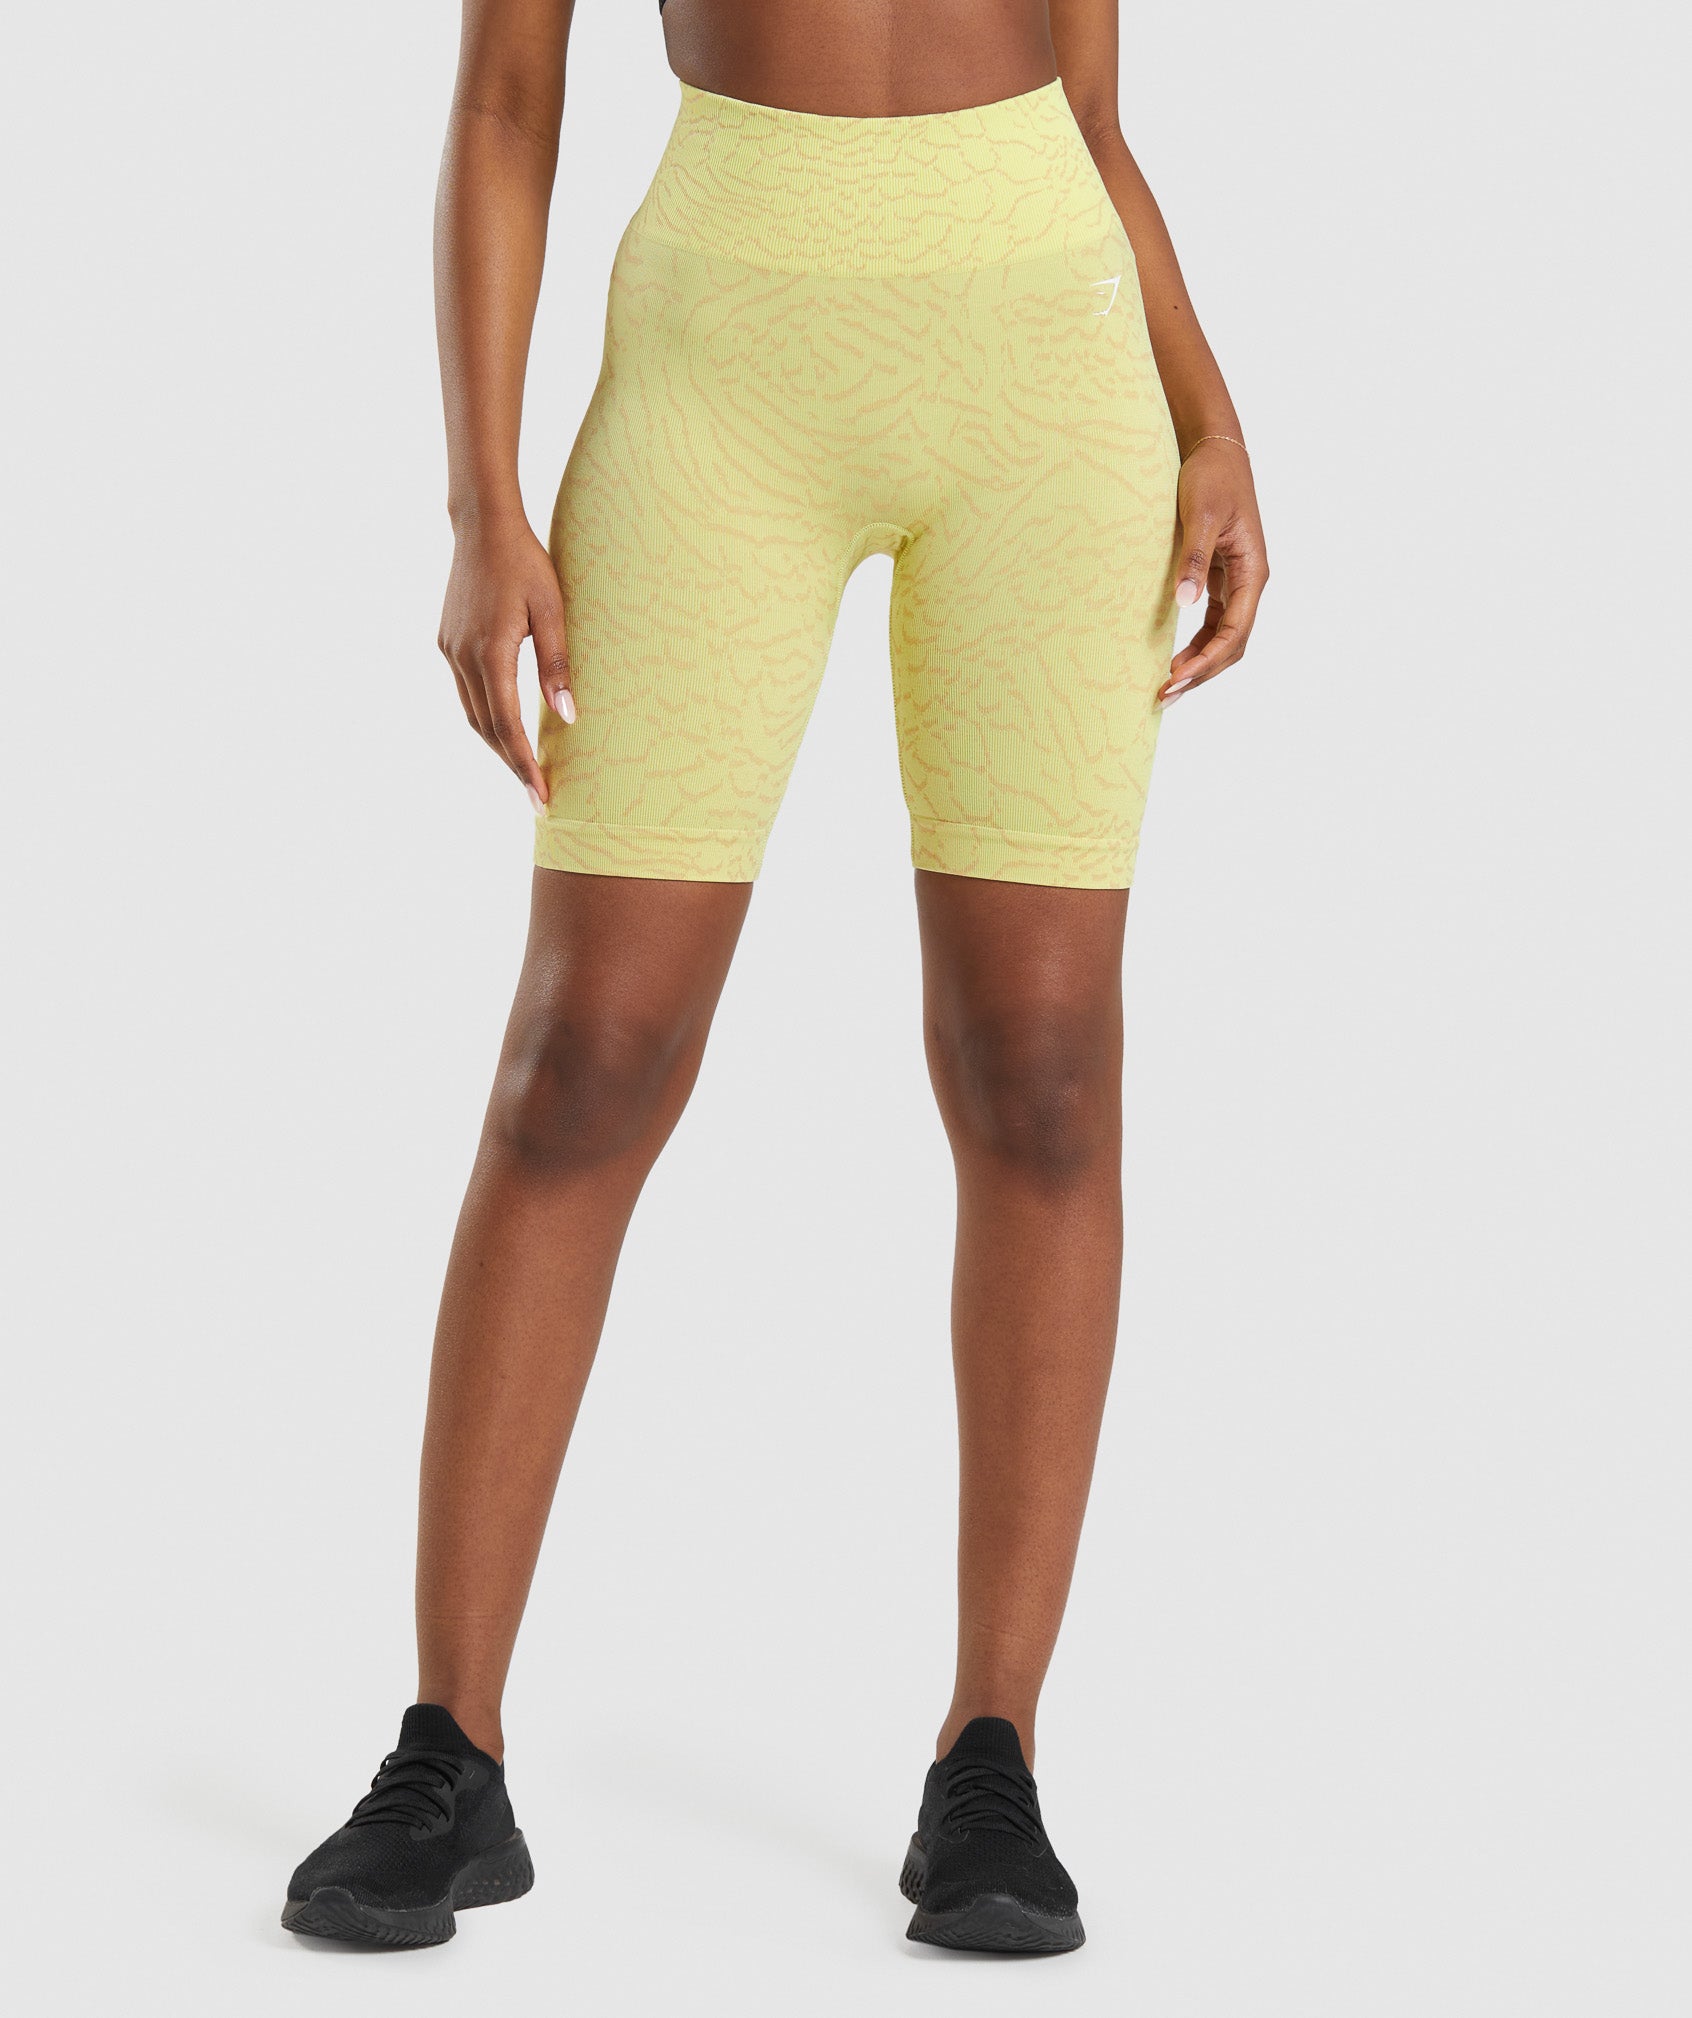 Adapt Animal Seamless Cycling Shorts in Hybrid | Firefly Yellow - view 1